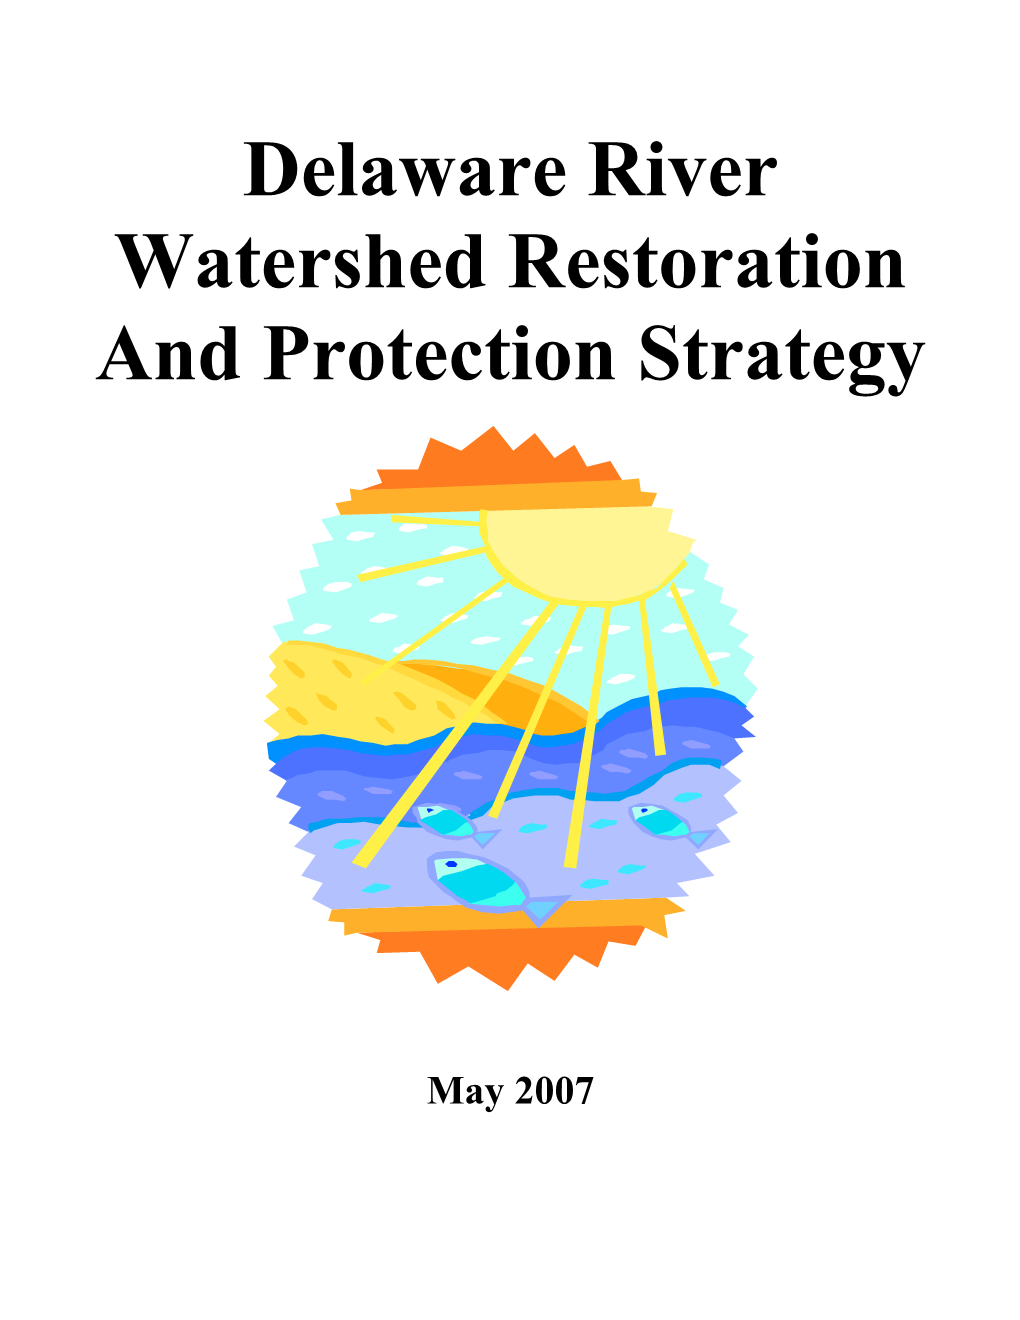 Delaware River Watershed Restoration and Protection Strategy